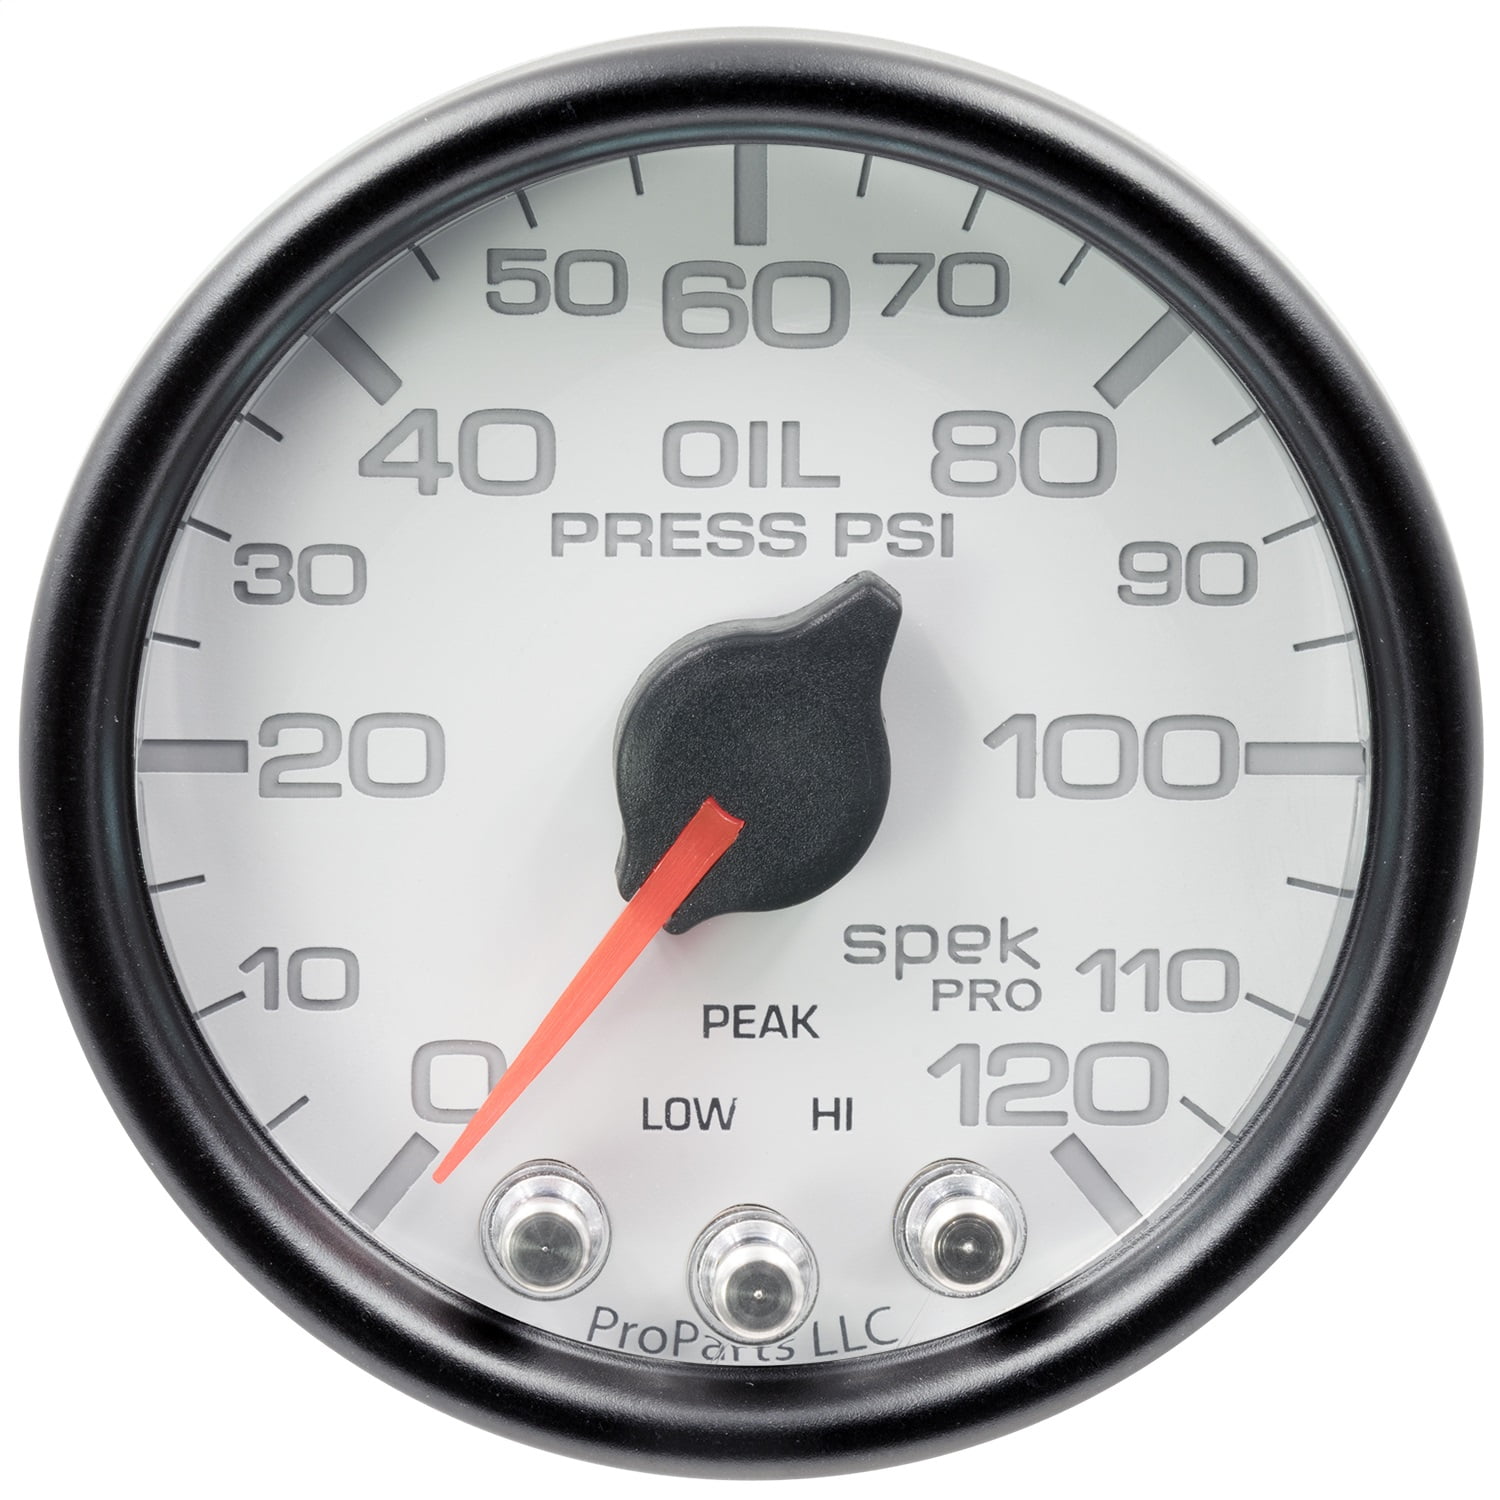 Dial Moves to Age Speed Racing Speedometer EDIBLE Cake Cupcake Image Topper 